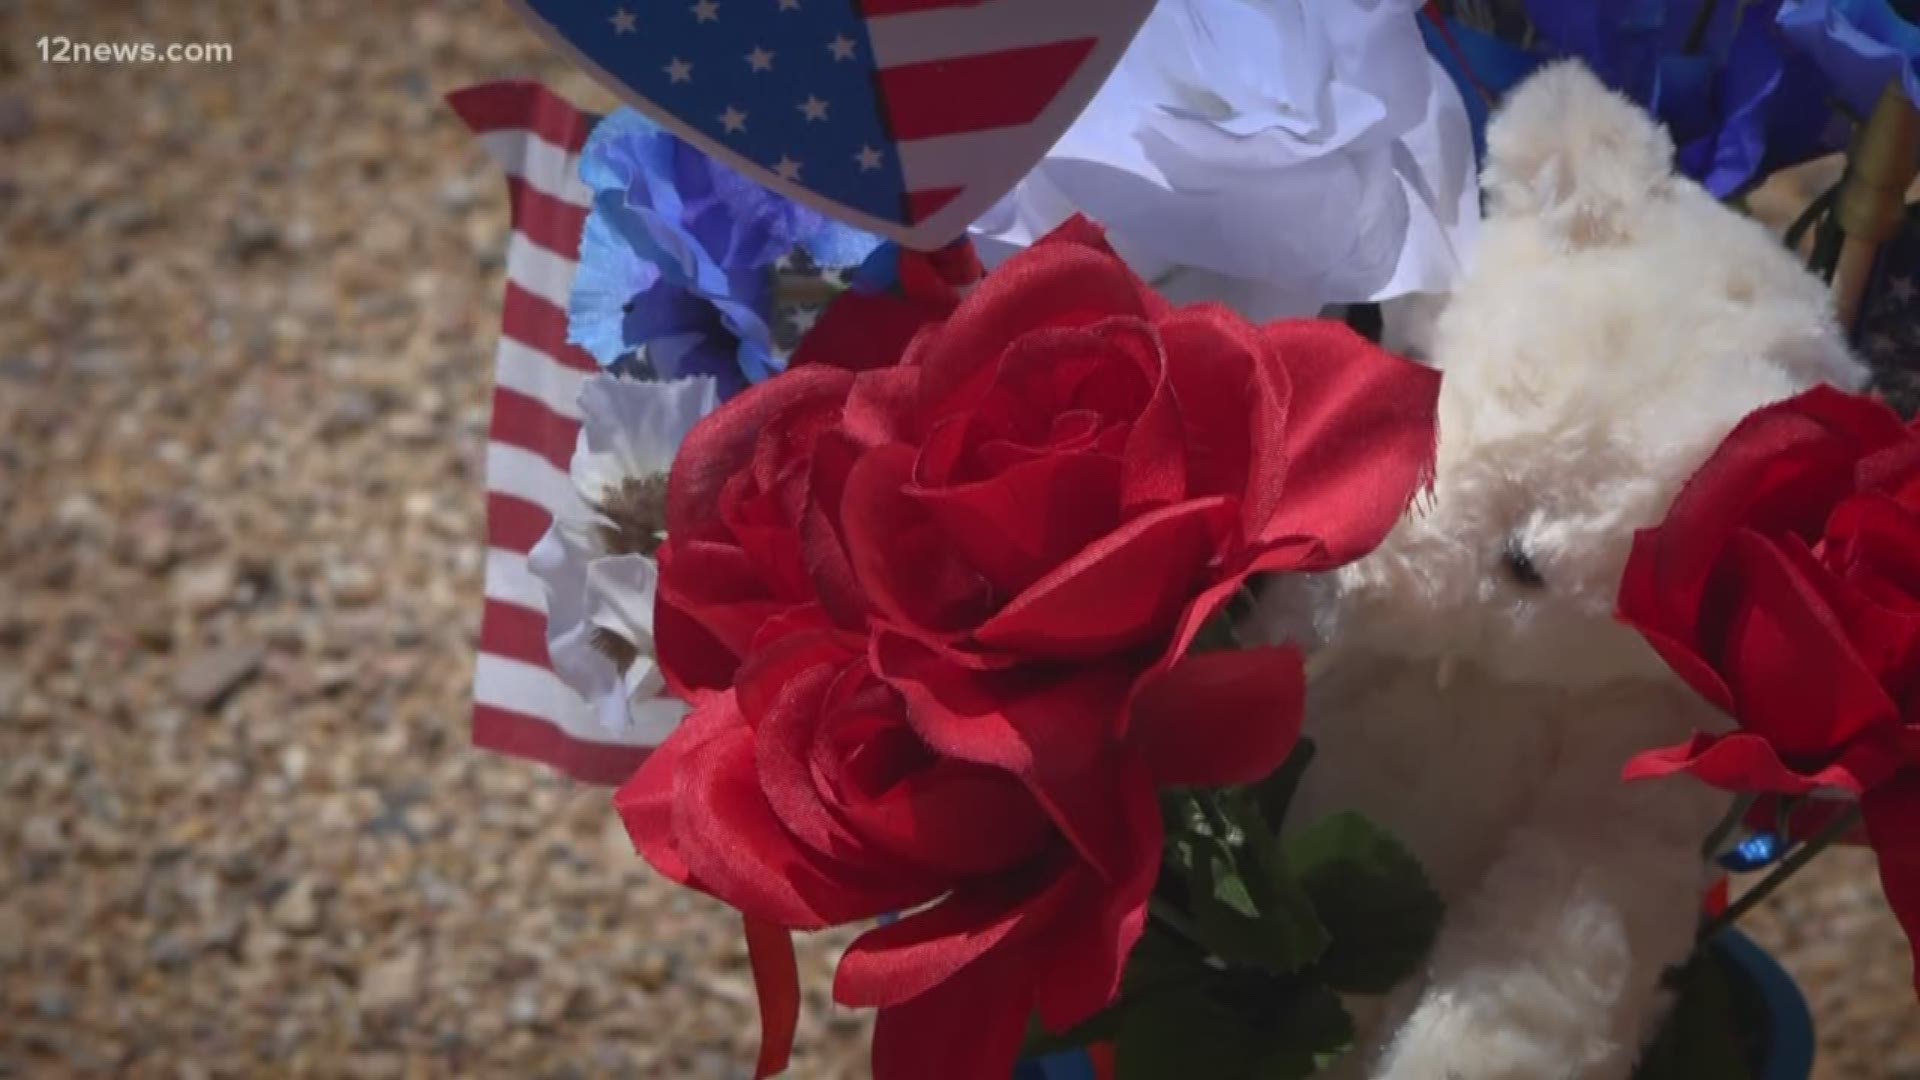 Gene Rayborn is honoring his late wife, a veteran, by making sure her gravesite and those around her are decorated for the Memorial Day holiday. Gene, a veteran himself, says he plans pm decorating the gravesites a holiday tradition.